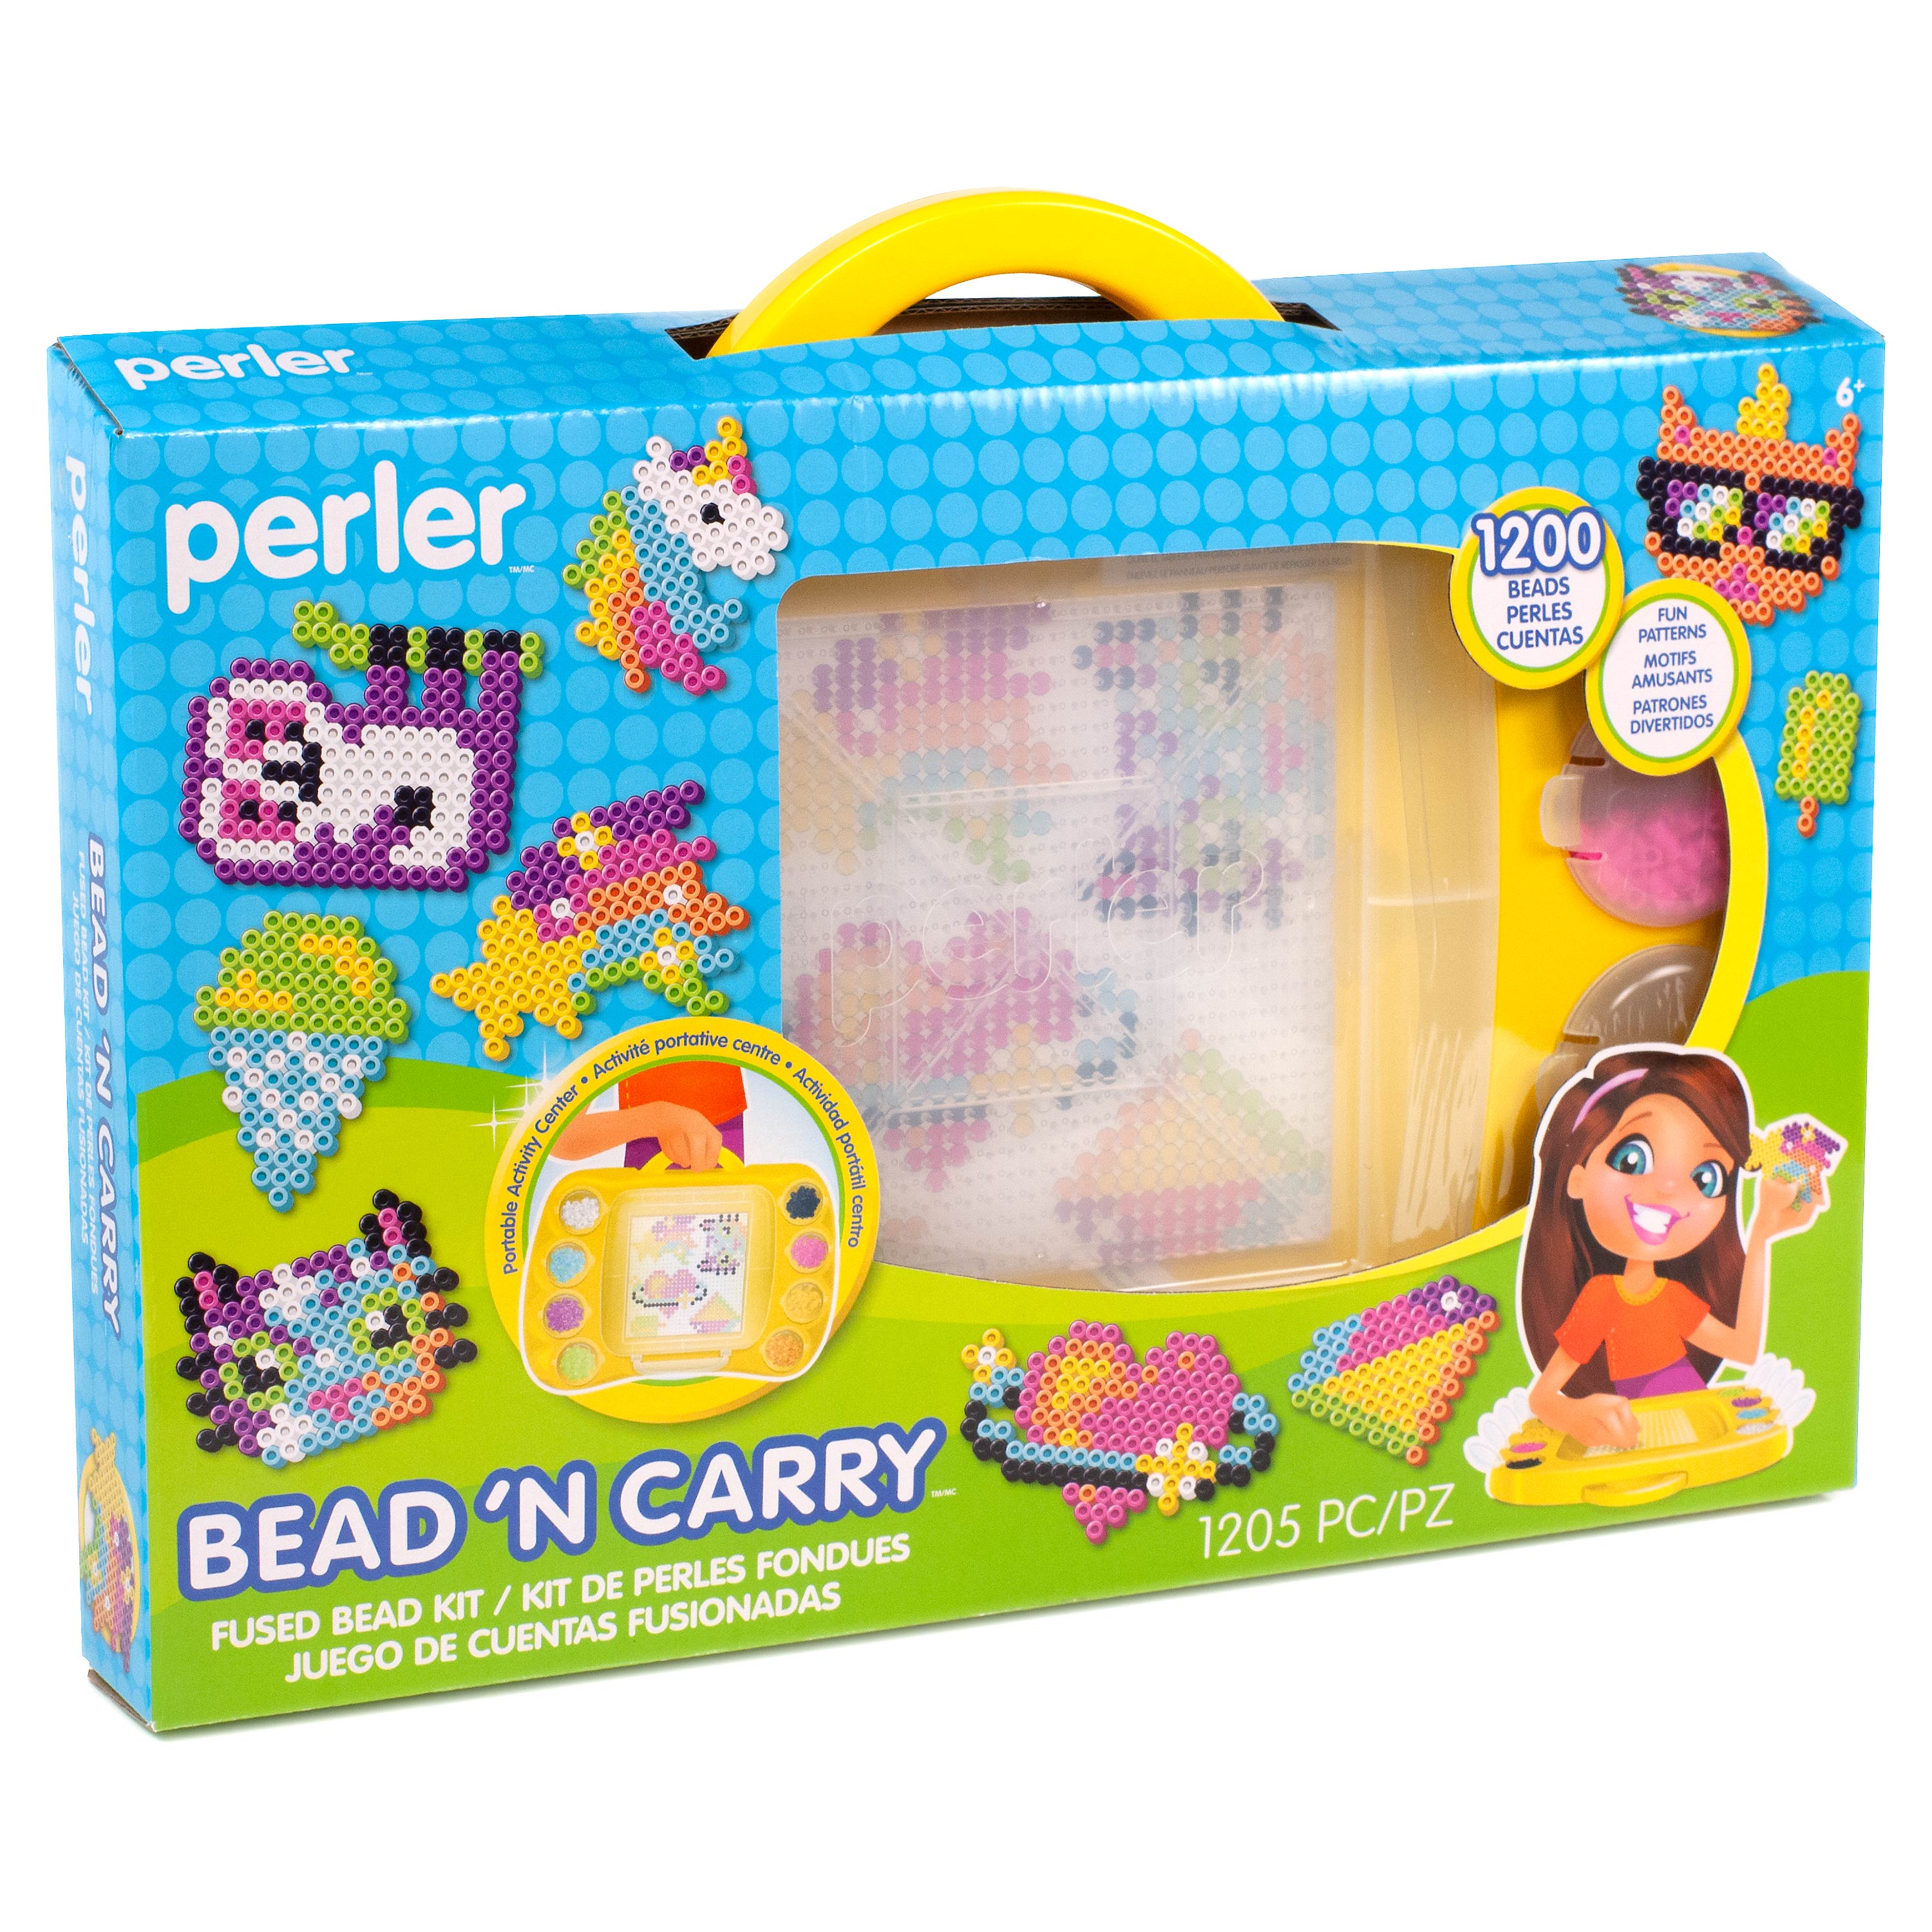 Perler Bead 'N Carry Fused Bead Activity Kit, Ages 6 and up, 1205 Pieces - image 4 of 5